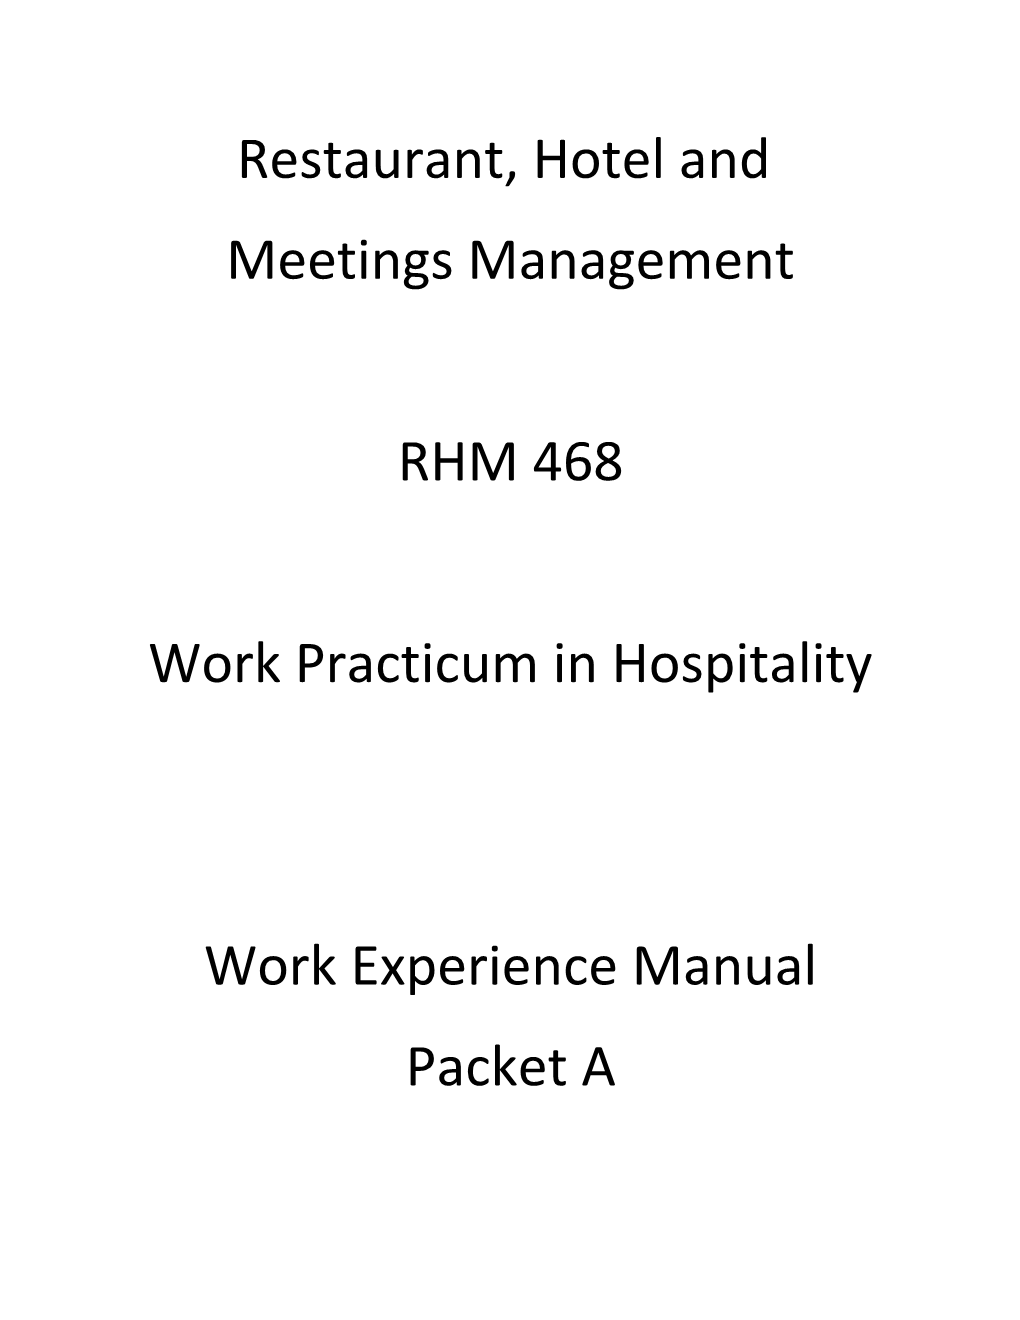 Steps to Be Completed for RHM 468 (Work Practicum)